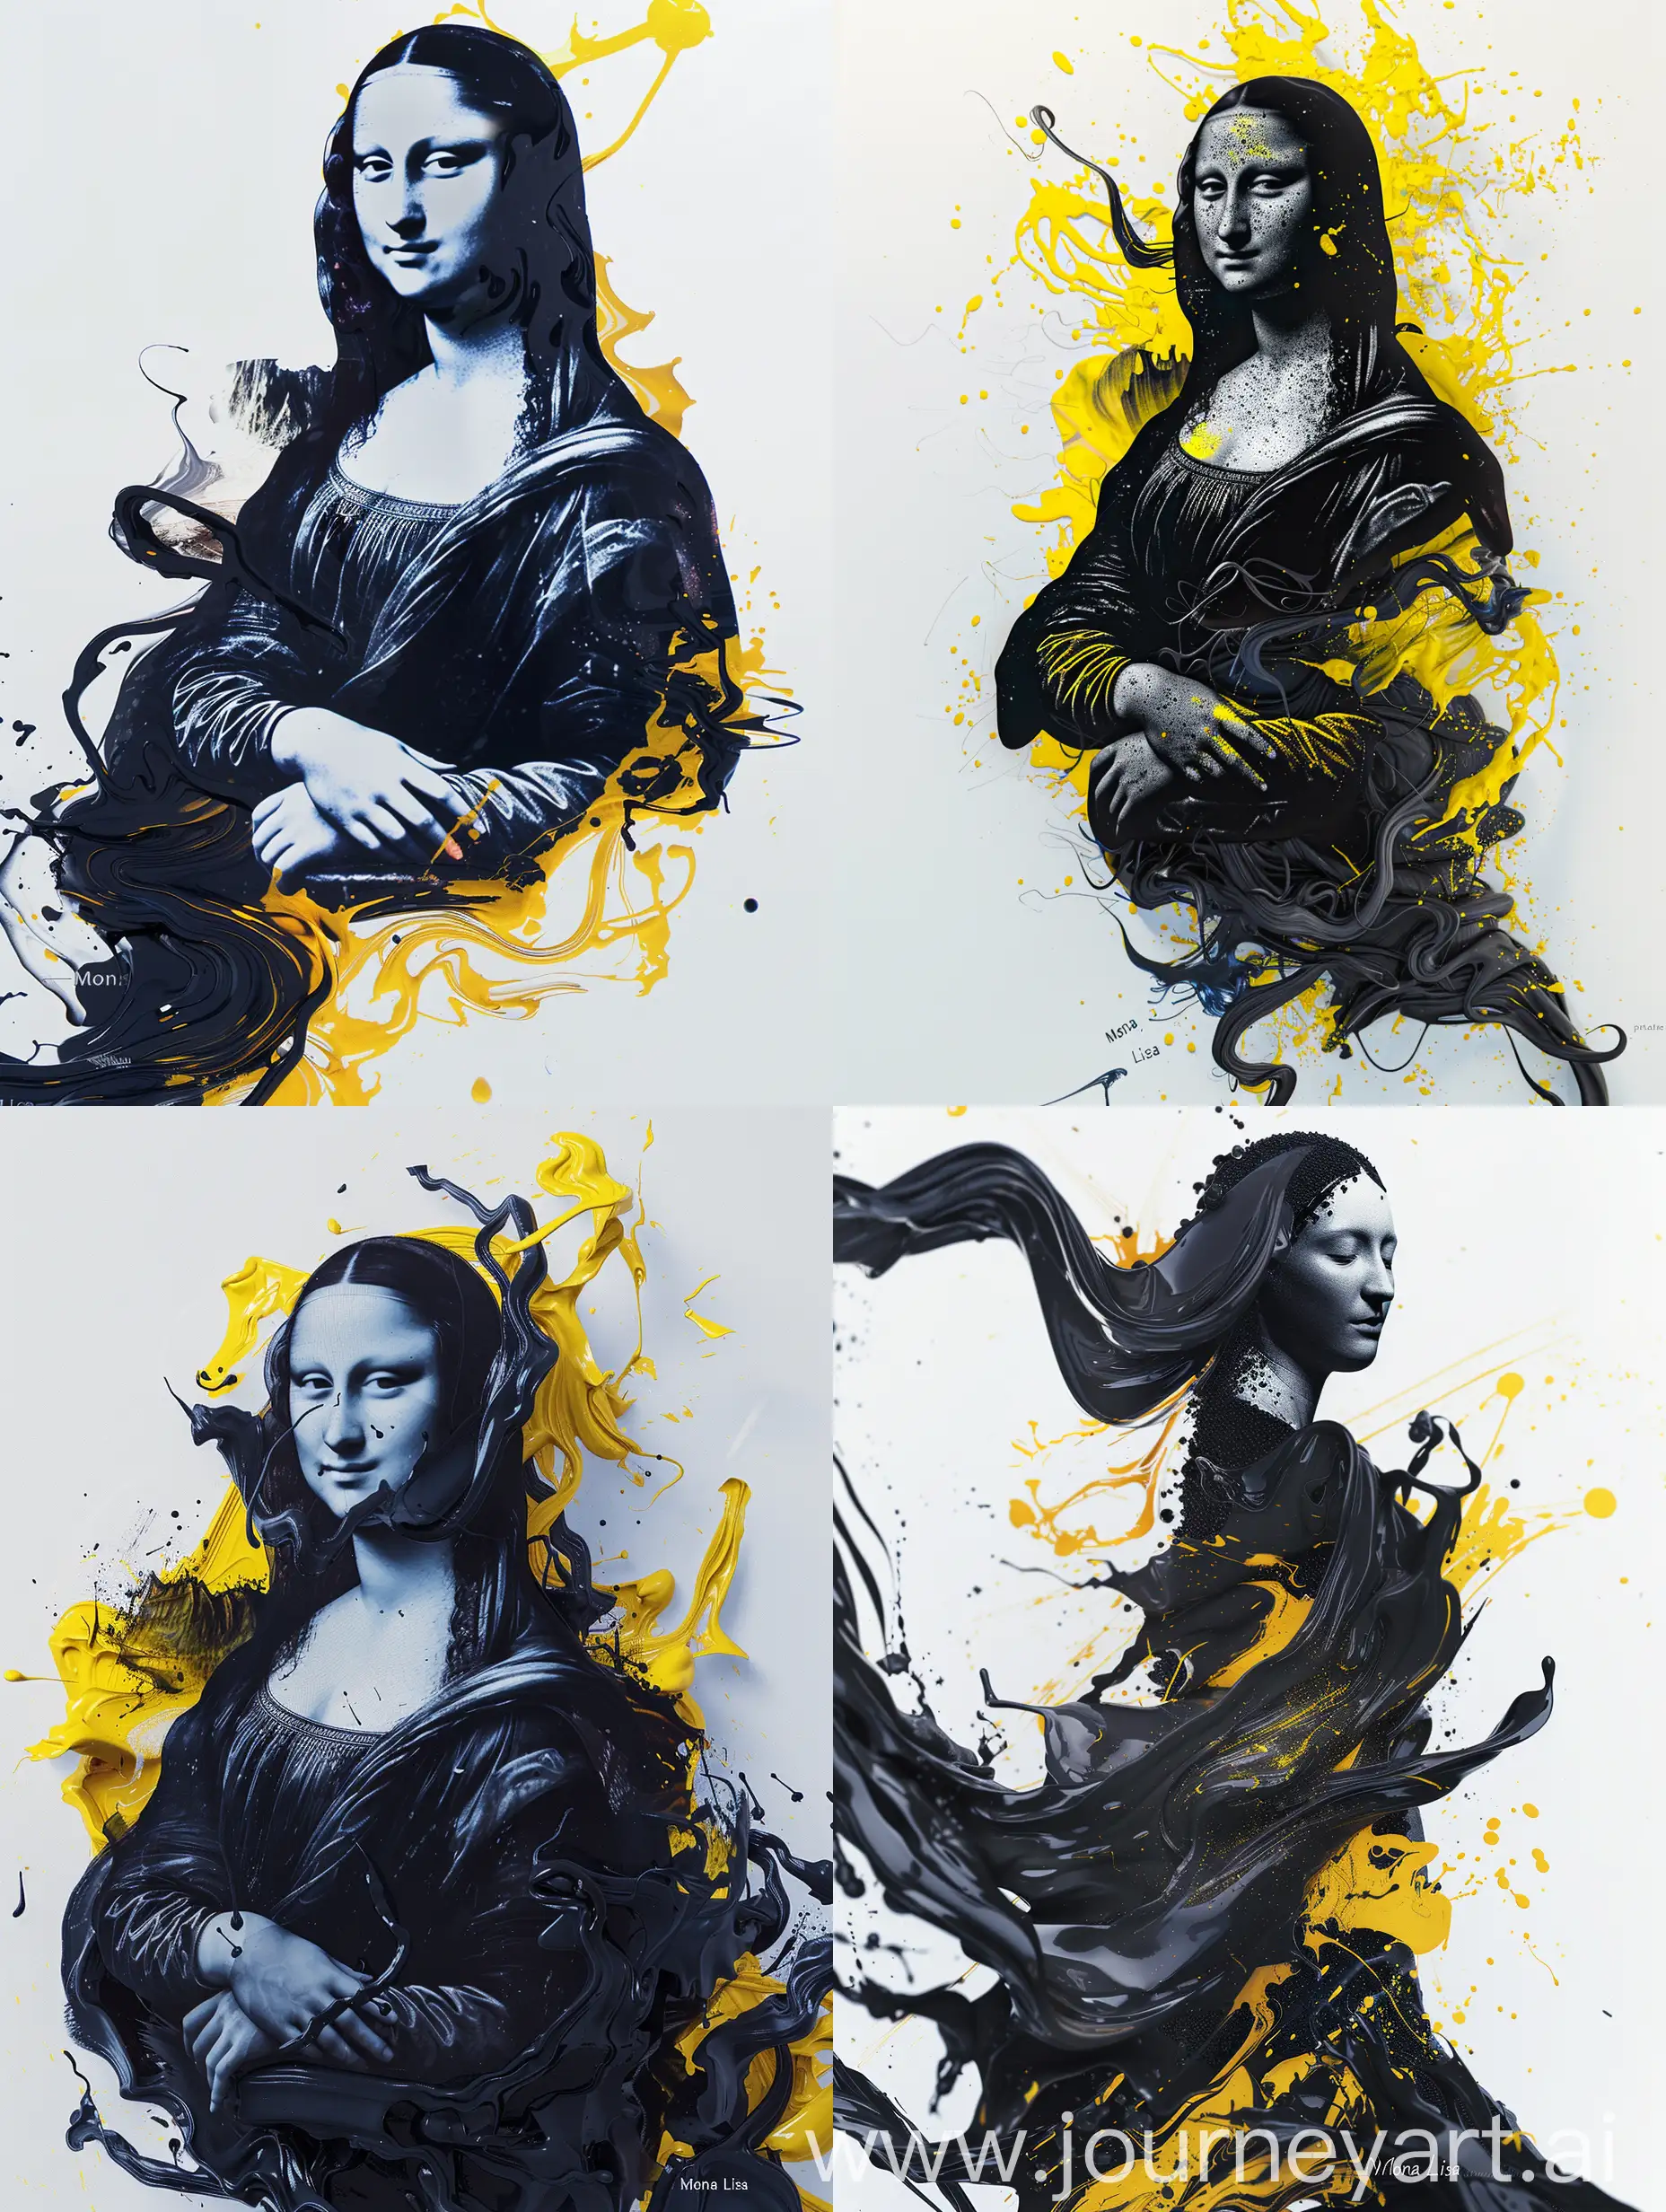 "A captivating digital “Mona Lisa” artwork featuring the silhouette of a woman molded by a black liquid goo that unfurls against a pristine white background, accompanied by a mesmerizing splash of yellow paint. The composition displays a surreal contrast between the fluid movement of the black goo and the vibrant yellow tones, evoking beauty and mystery. The addition of the black fluid goo adds depth to the piece, while the unstirred paint and programmable black goo introduce elements of unpredictability and futurism. Azo yellow details enrich the color palette, resulting in a dynamic atmosphere and "A compelling visual experience. "The unique combination of colors, textures and movements of the artwork captivates the viewer and offers an unforgettable visual journey."